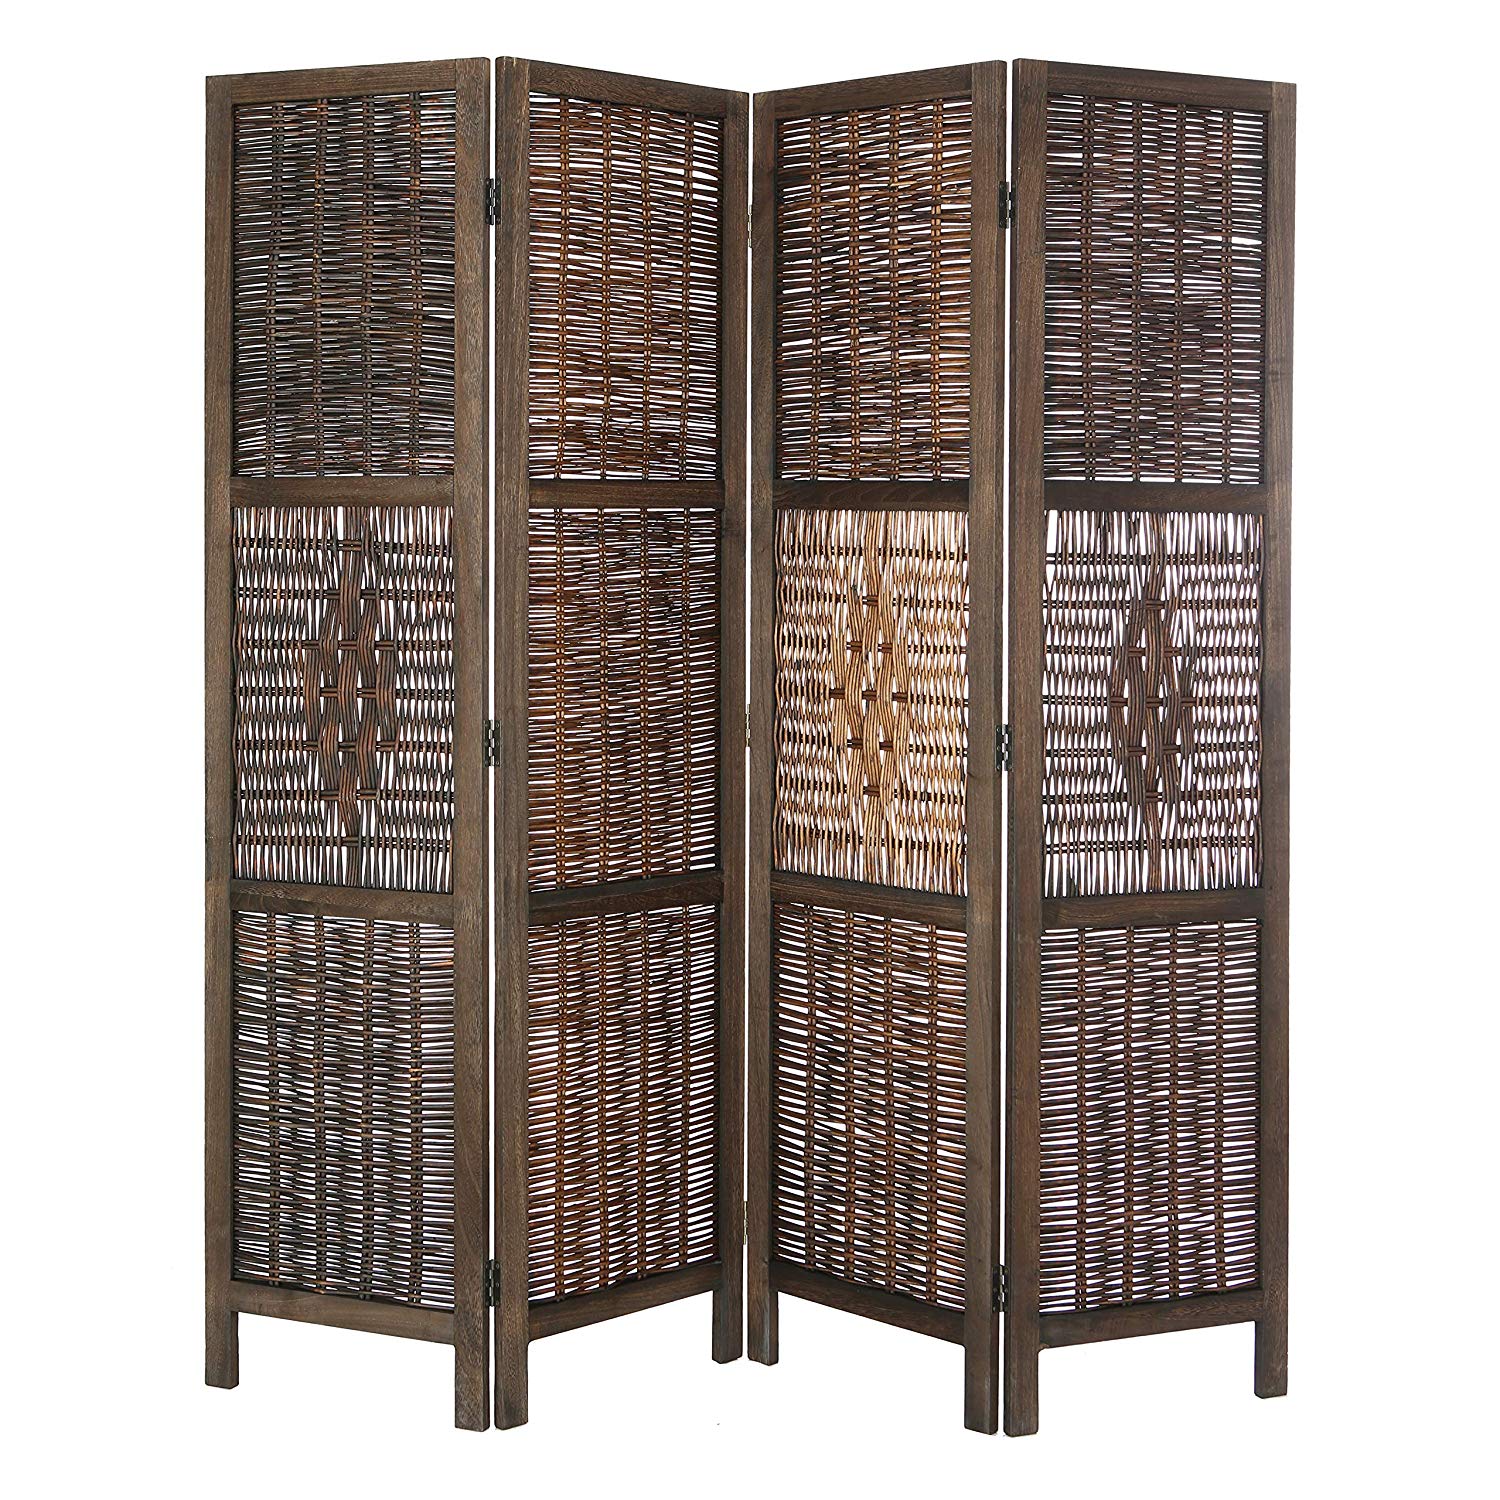 Legacy Decor Antique Wicker and Wood Diamond Design 4 Panel Room Divider, 67" Tall, Brown - image 1 of 5